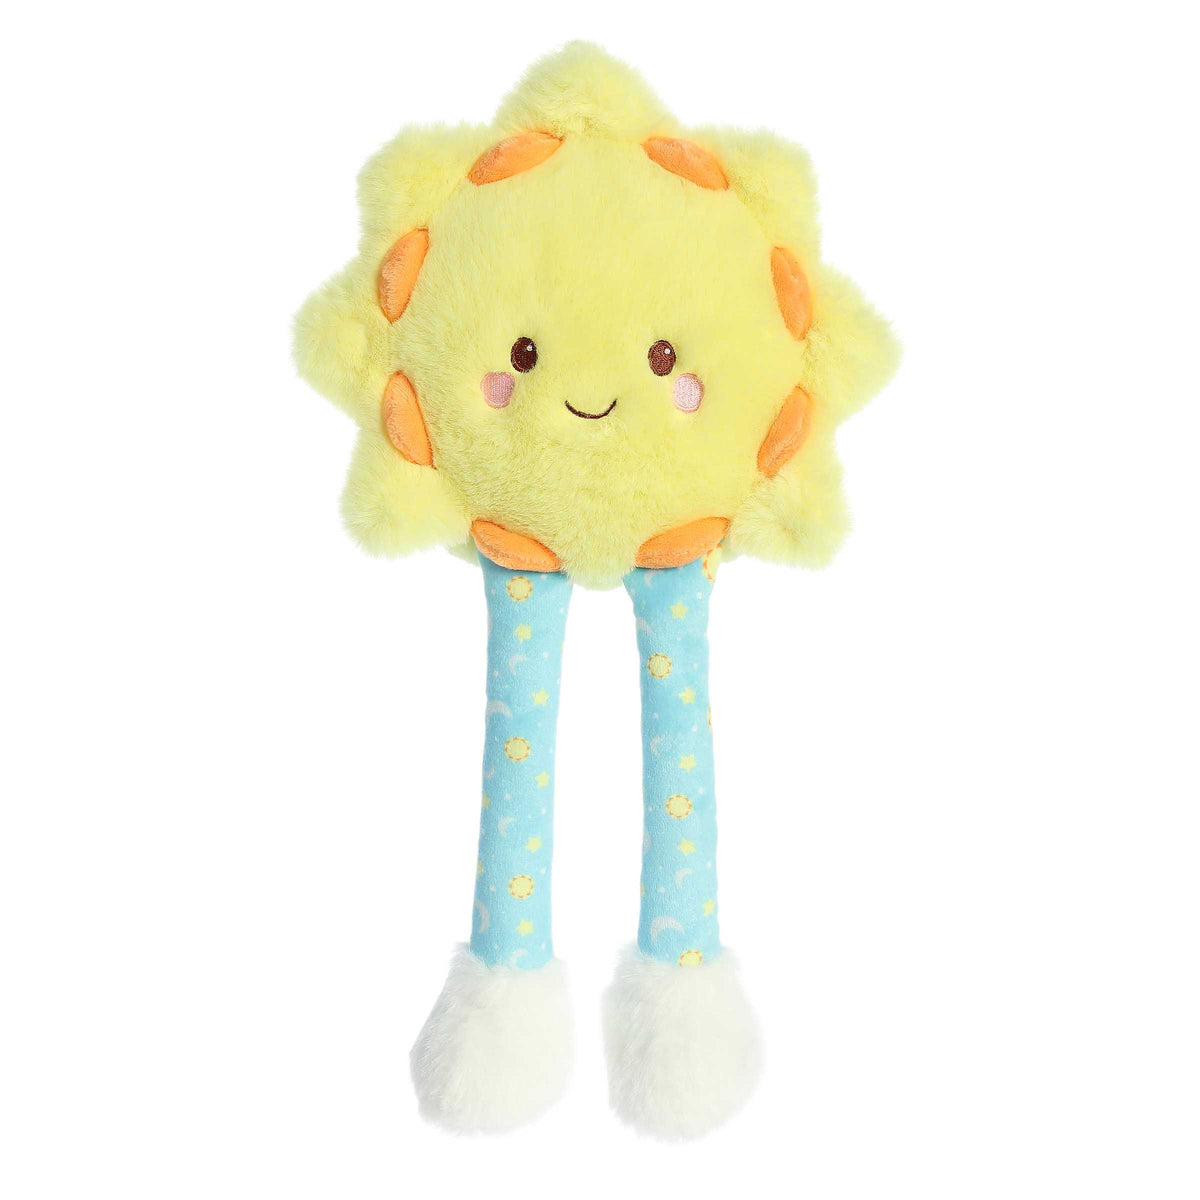 Bright yellow Sun plush toy with yellow body, smiling face, long blue space patterned floppy legs and white fur on feet.